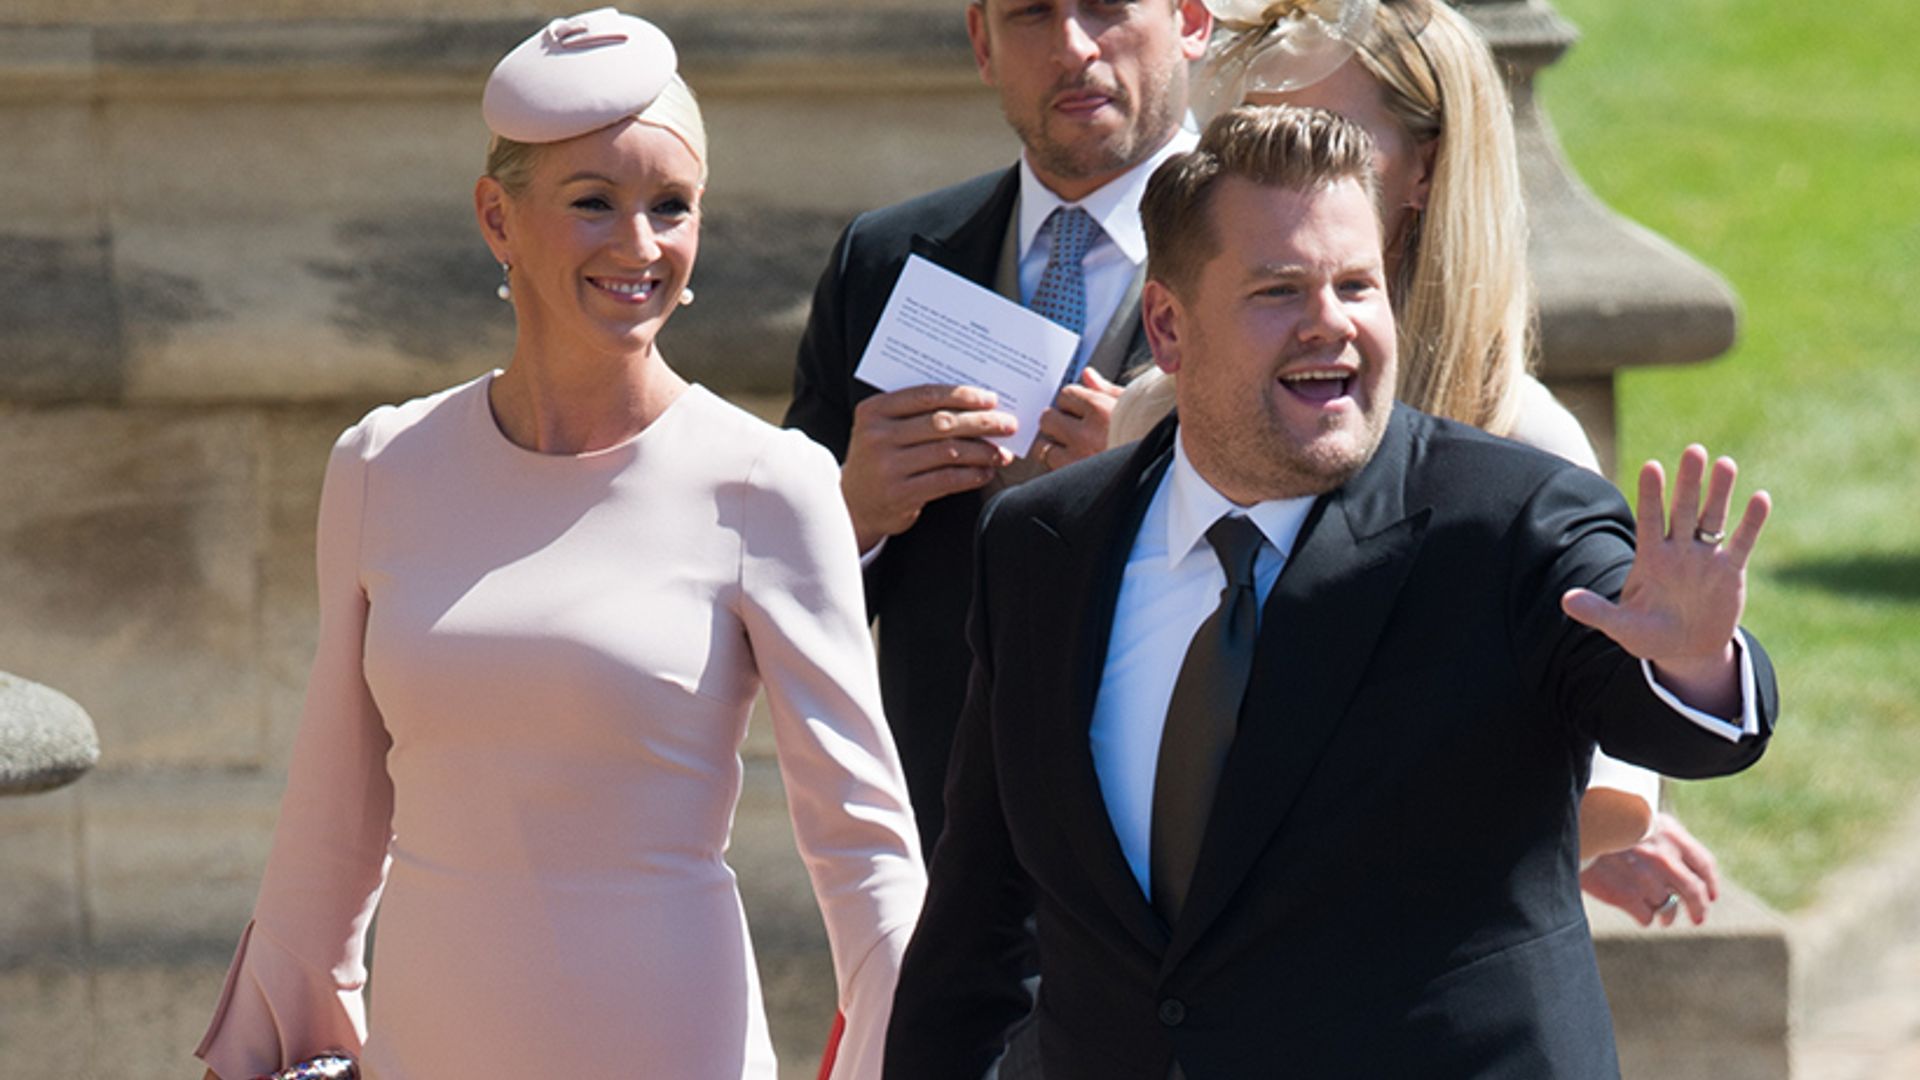 James Corden reveals he almost interrupted Prince Harry and Meghan Markle's wedding vows